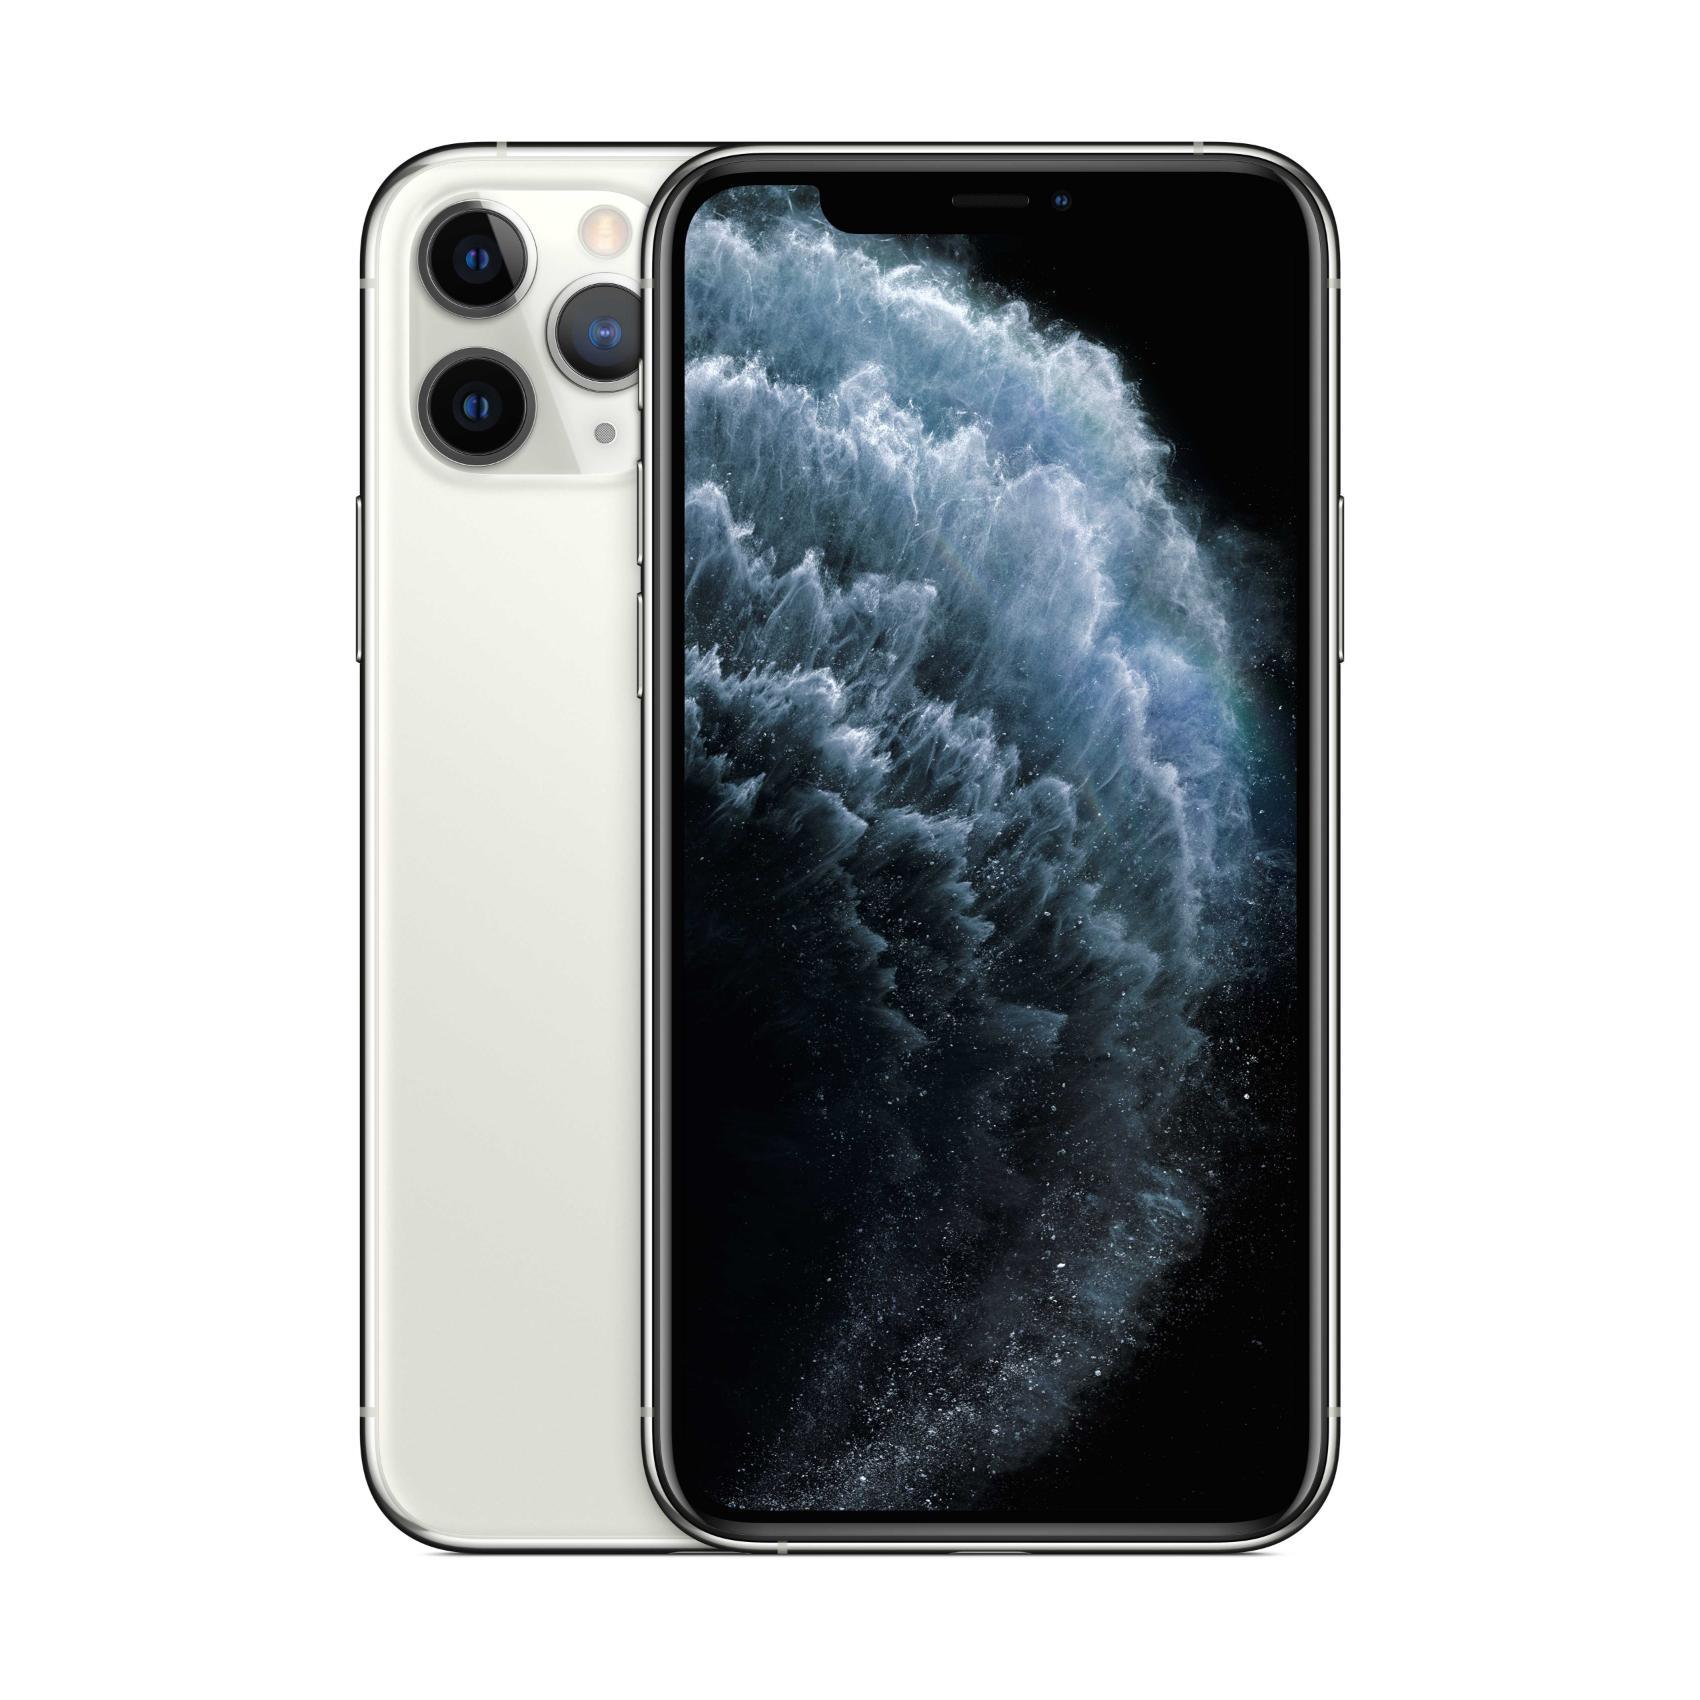 Buy Apple Iphone 11 Pro Without Facetime 256gb 4g Lte Silver Online Shop Smartphones Tablets Wearables On Carrefour Uae